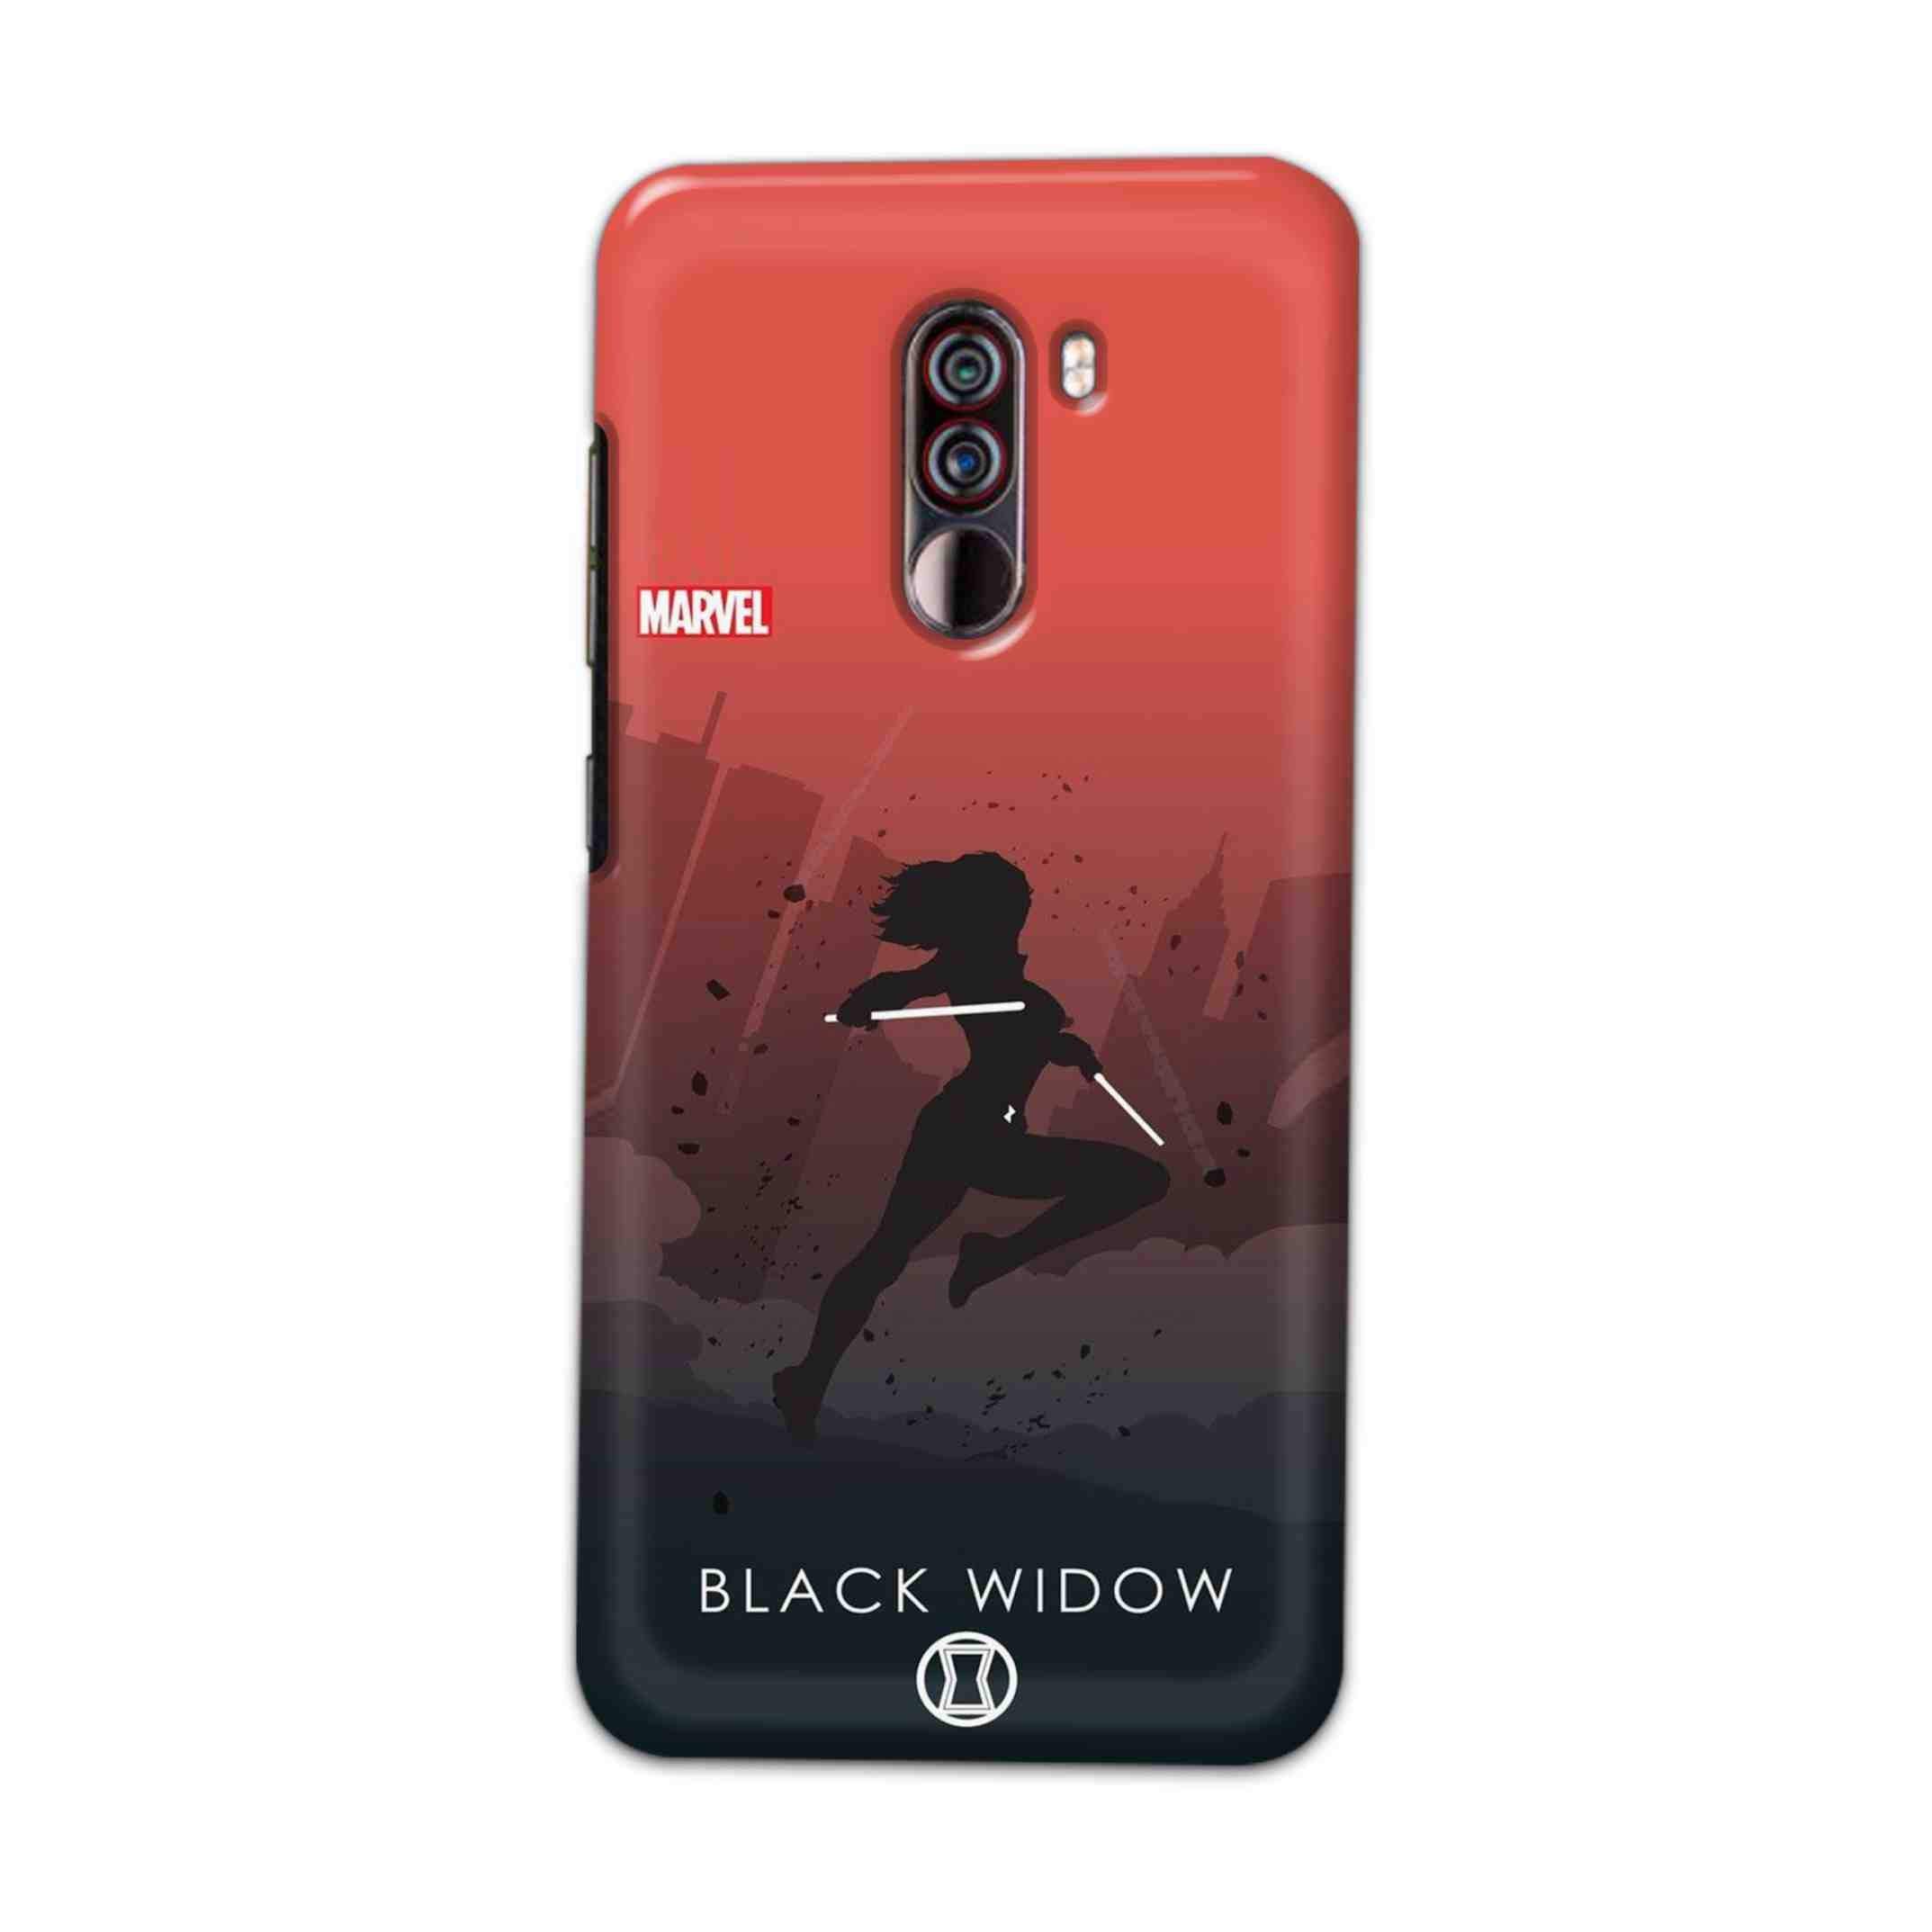 Buy Black Widow Hard Back Mobile Phone Case Cover For Xiaomi Pocophone F1 Online